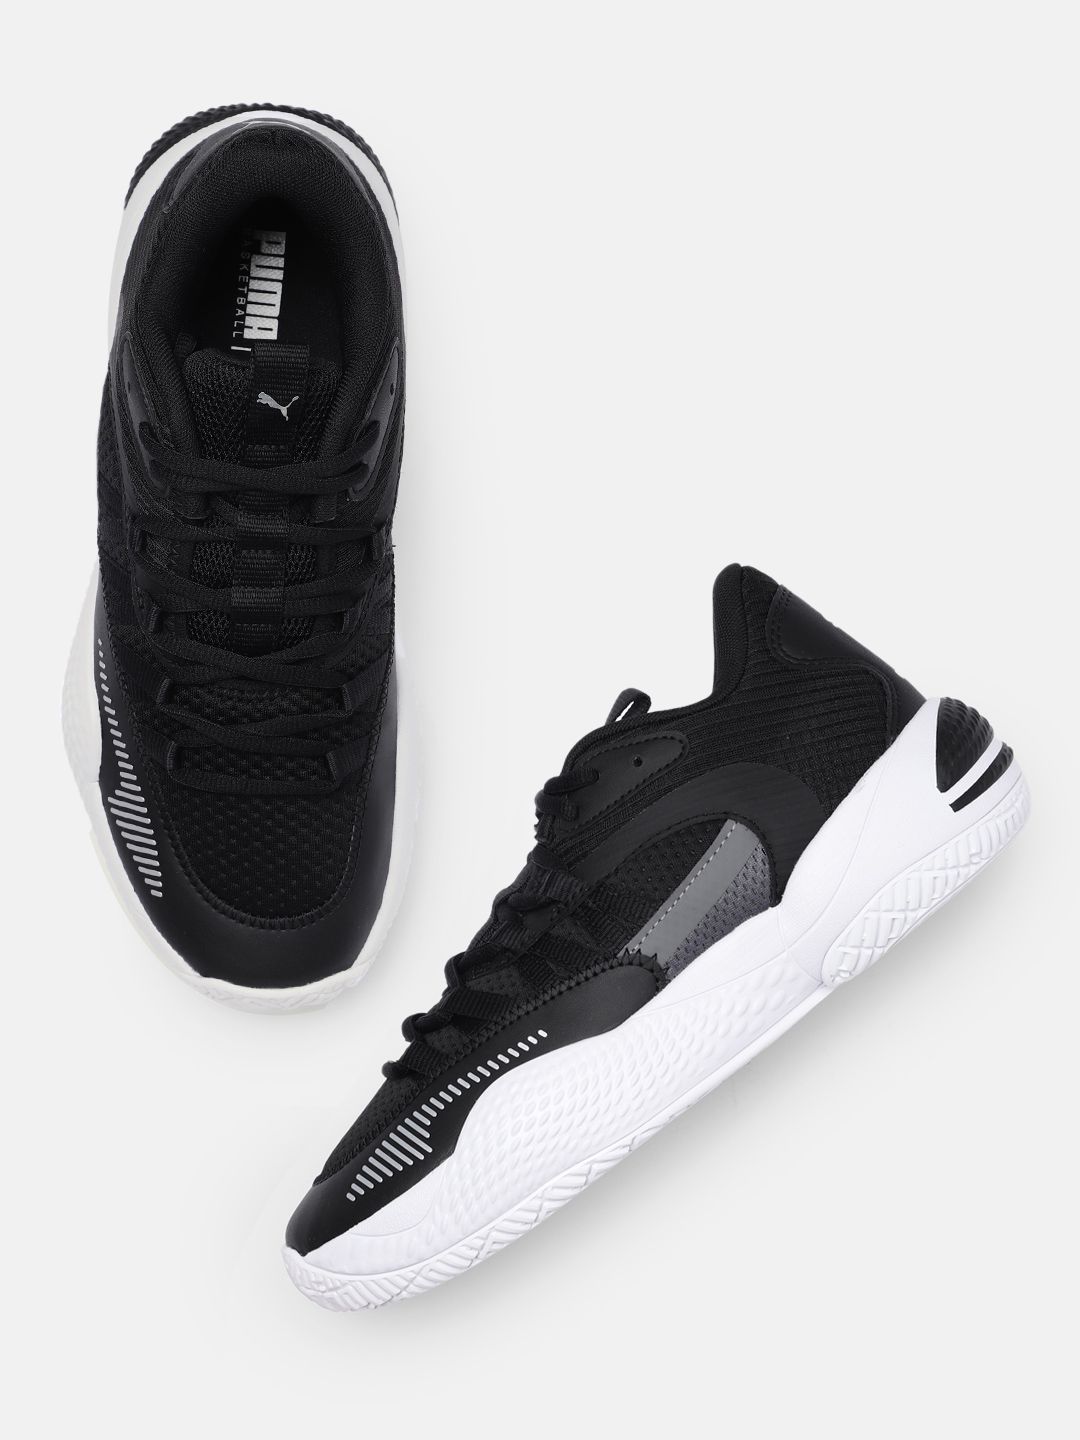 Puma Unisex Black Court Rider 2.0 Basketball Shoes Price in India